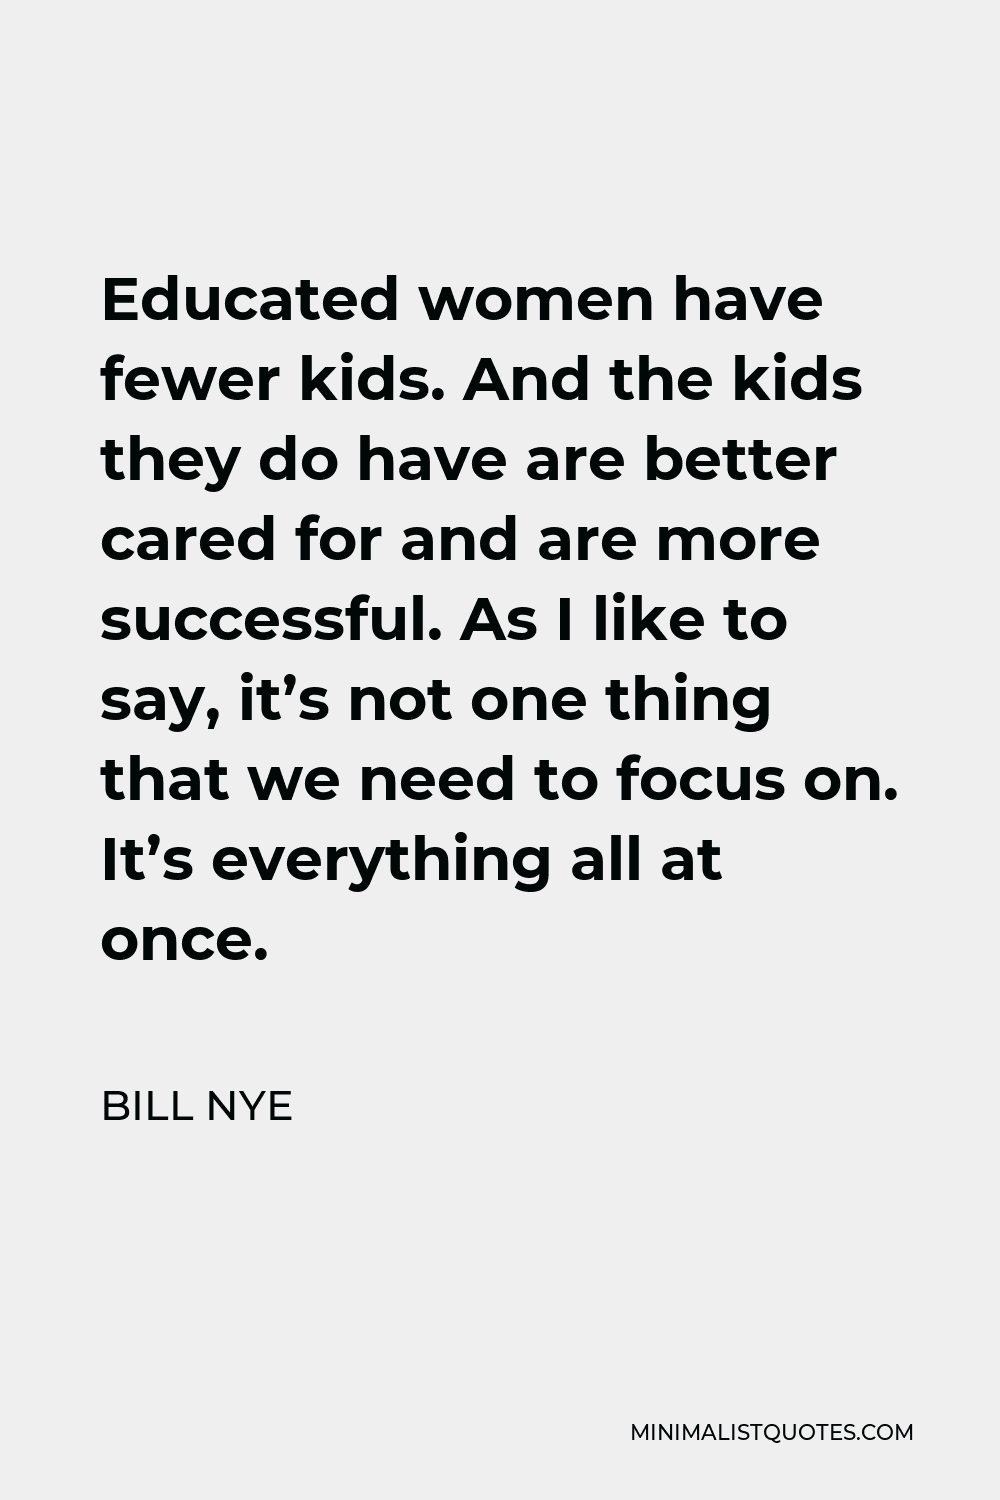 Bill Nye Quote - Educated women have fewer kids. And the kids they do have are better cared for and are more successful. As I like to say, it’s not one thing that we need to focus on. It’s everything all at once.